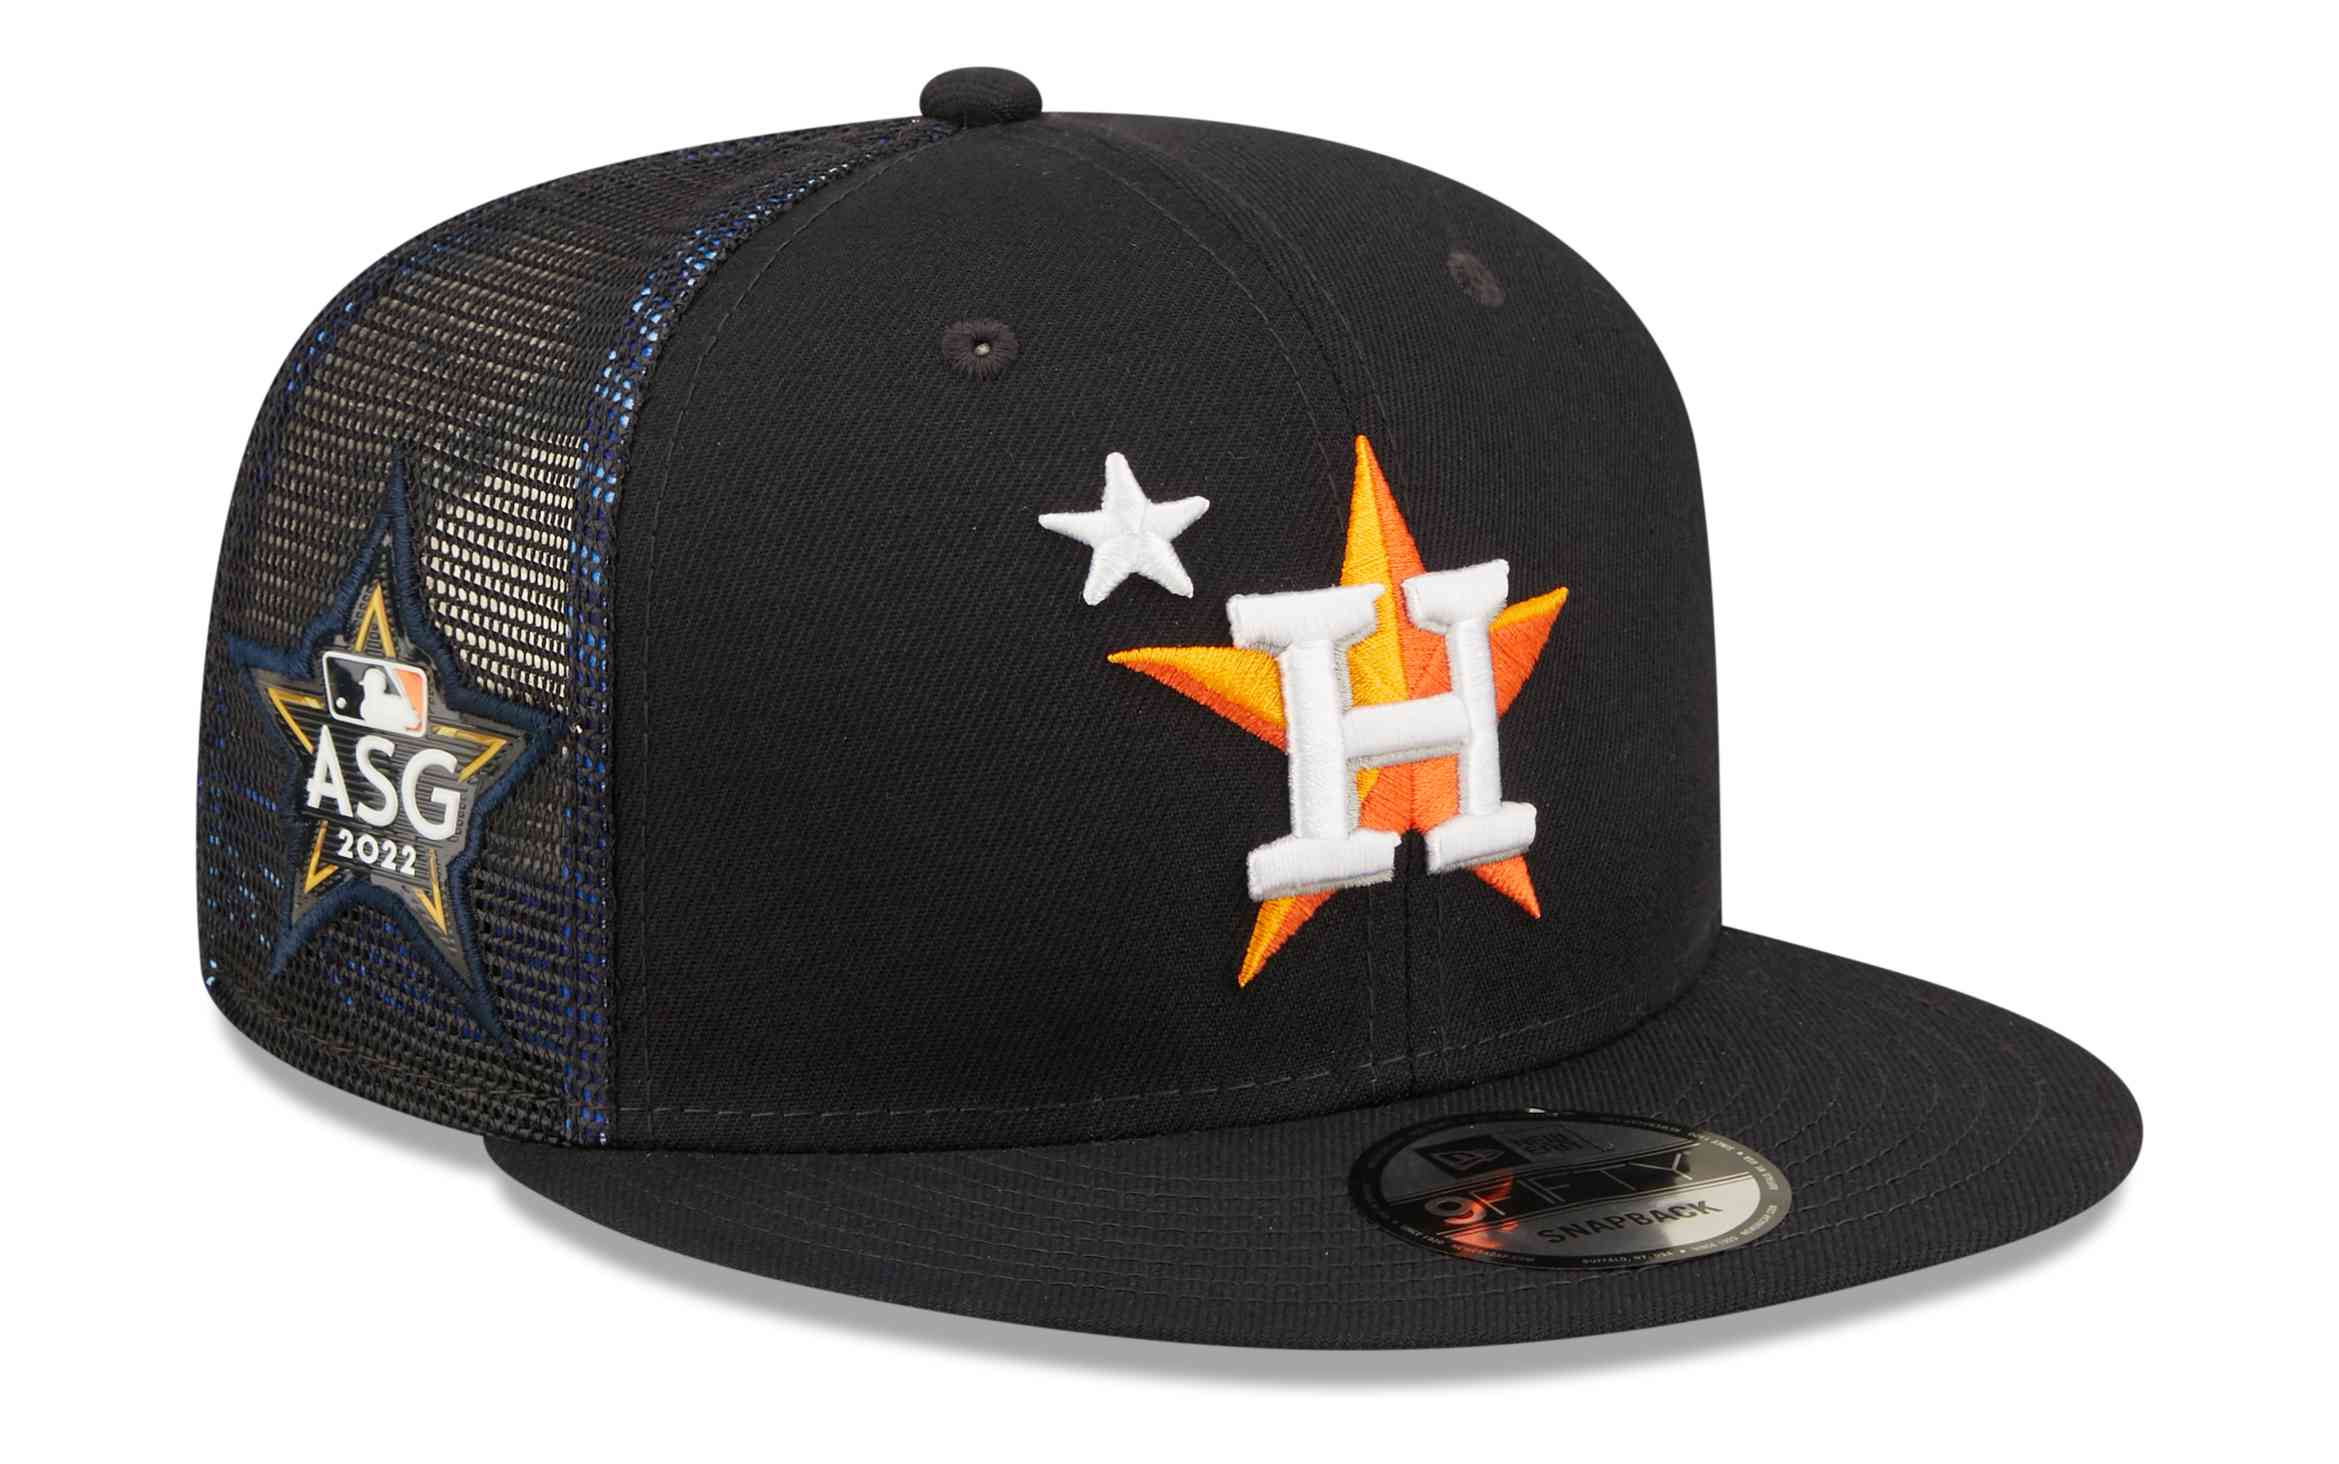 New Era - MLB Houston Astros All Star Game Patch 9Fifty